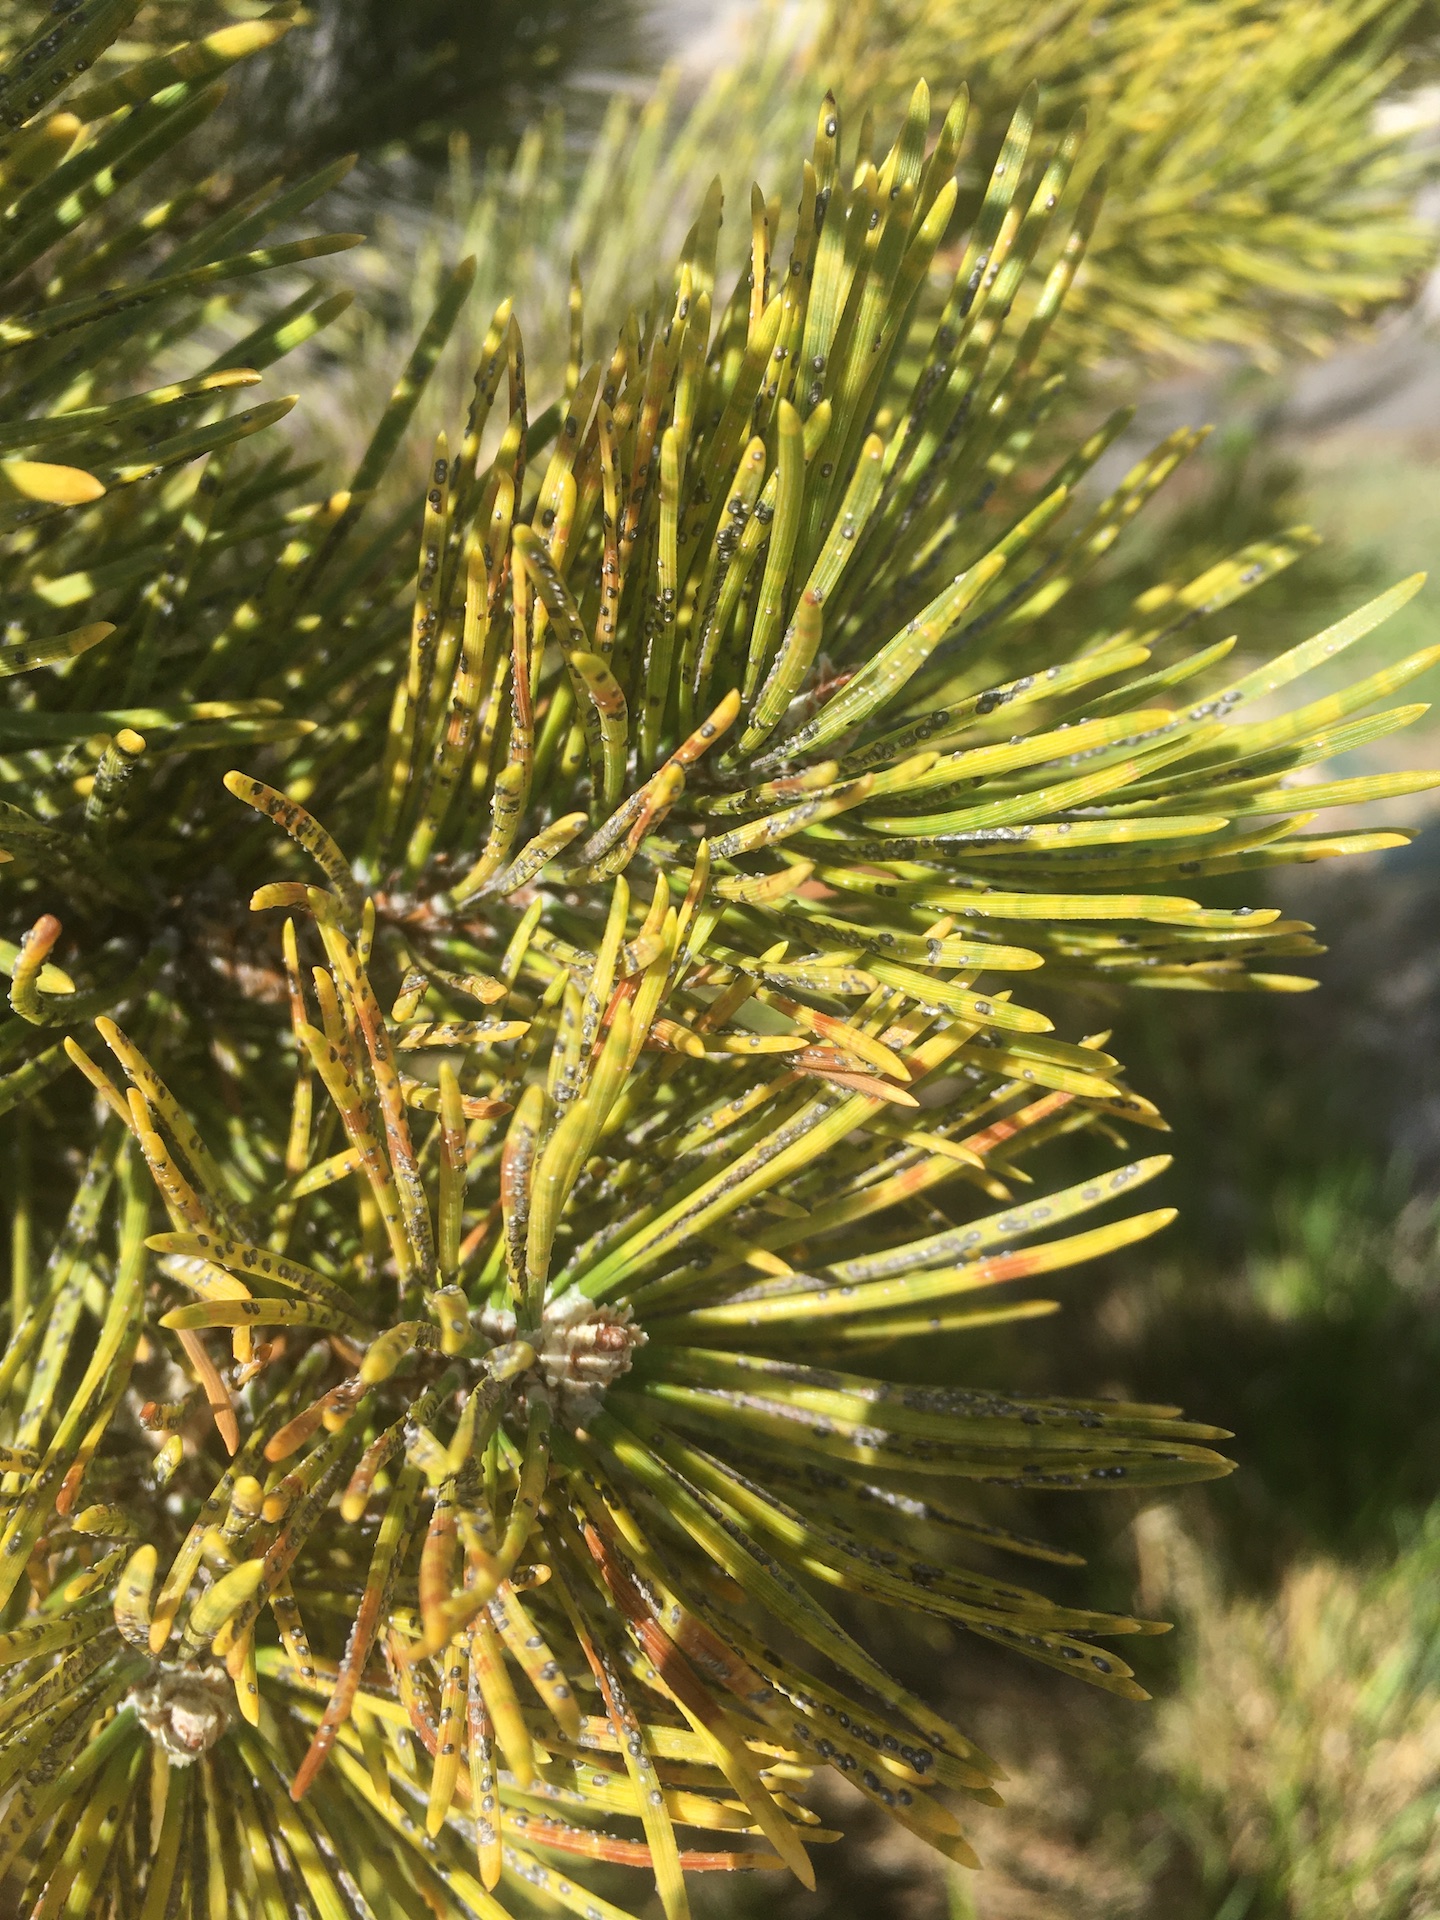 Yellow and Brown Pine needles with pine scale